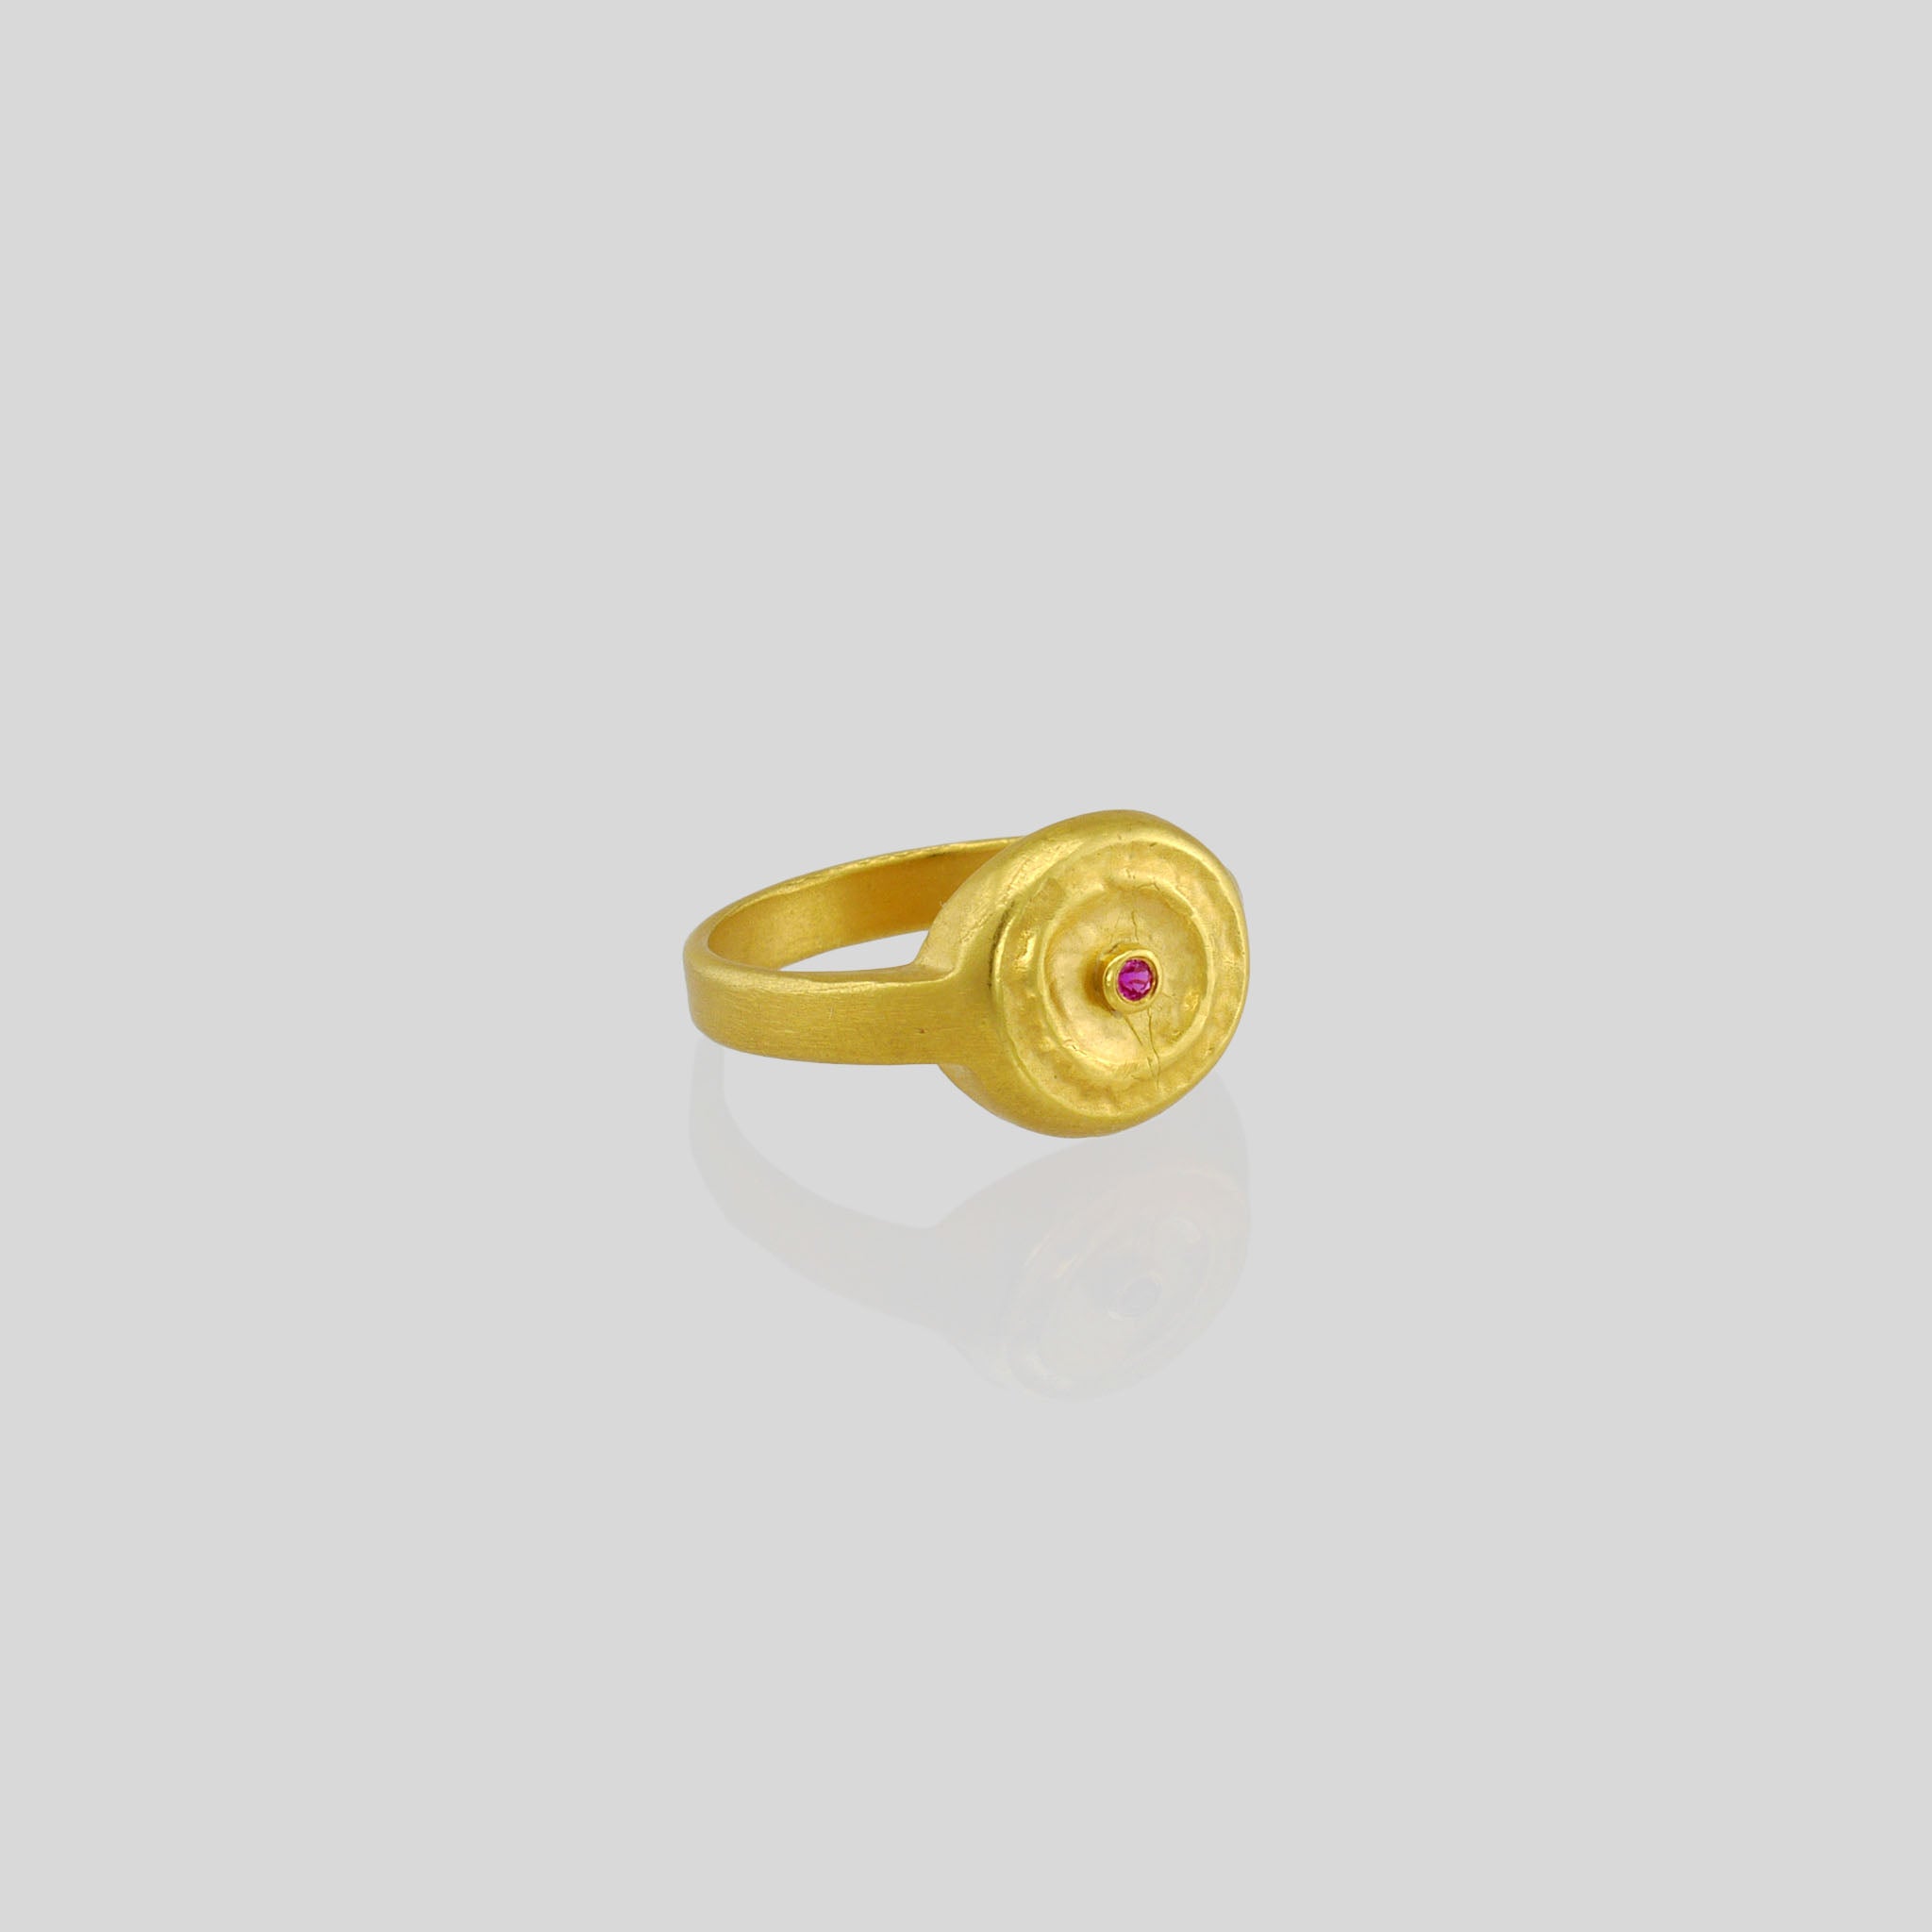 Handmade 18k Gold ring with a central Ruby, exuding vintage charm reminiscent of the Egyptian pharaohs' era.